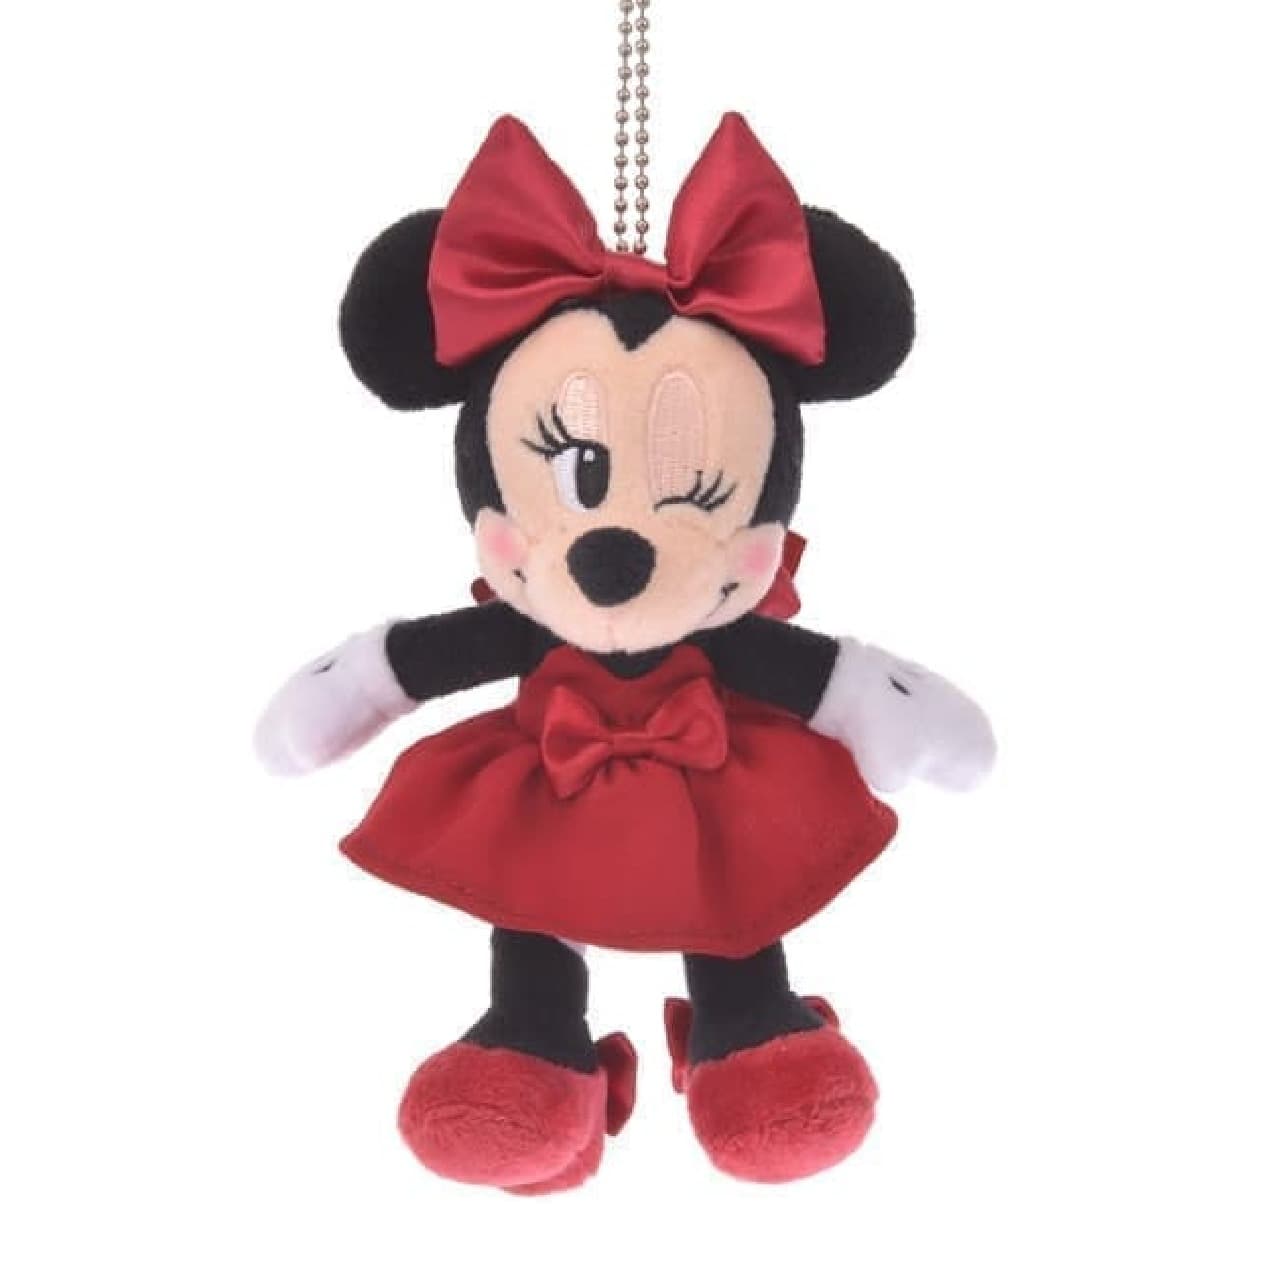 March 2nd is "Minnie Mouse Day" ♪ Commemorative goods from Disney Store--Bags and pouches in collaboration with LANVIN en Bleu